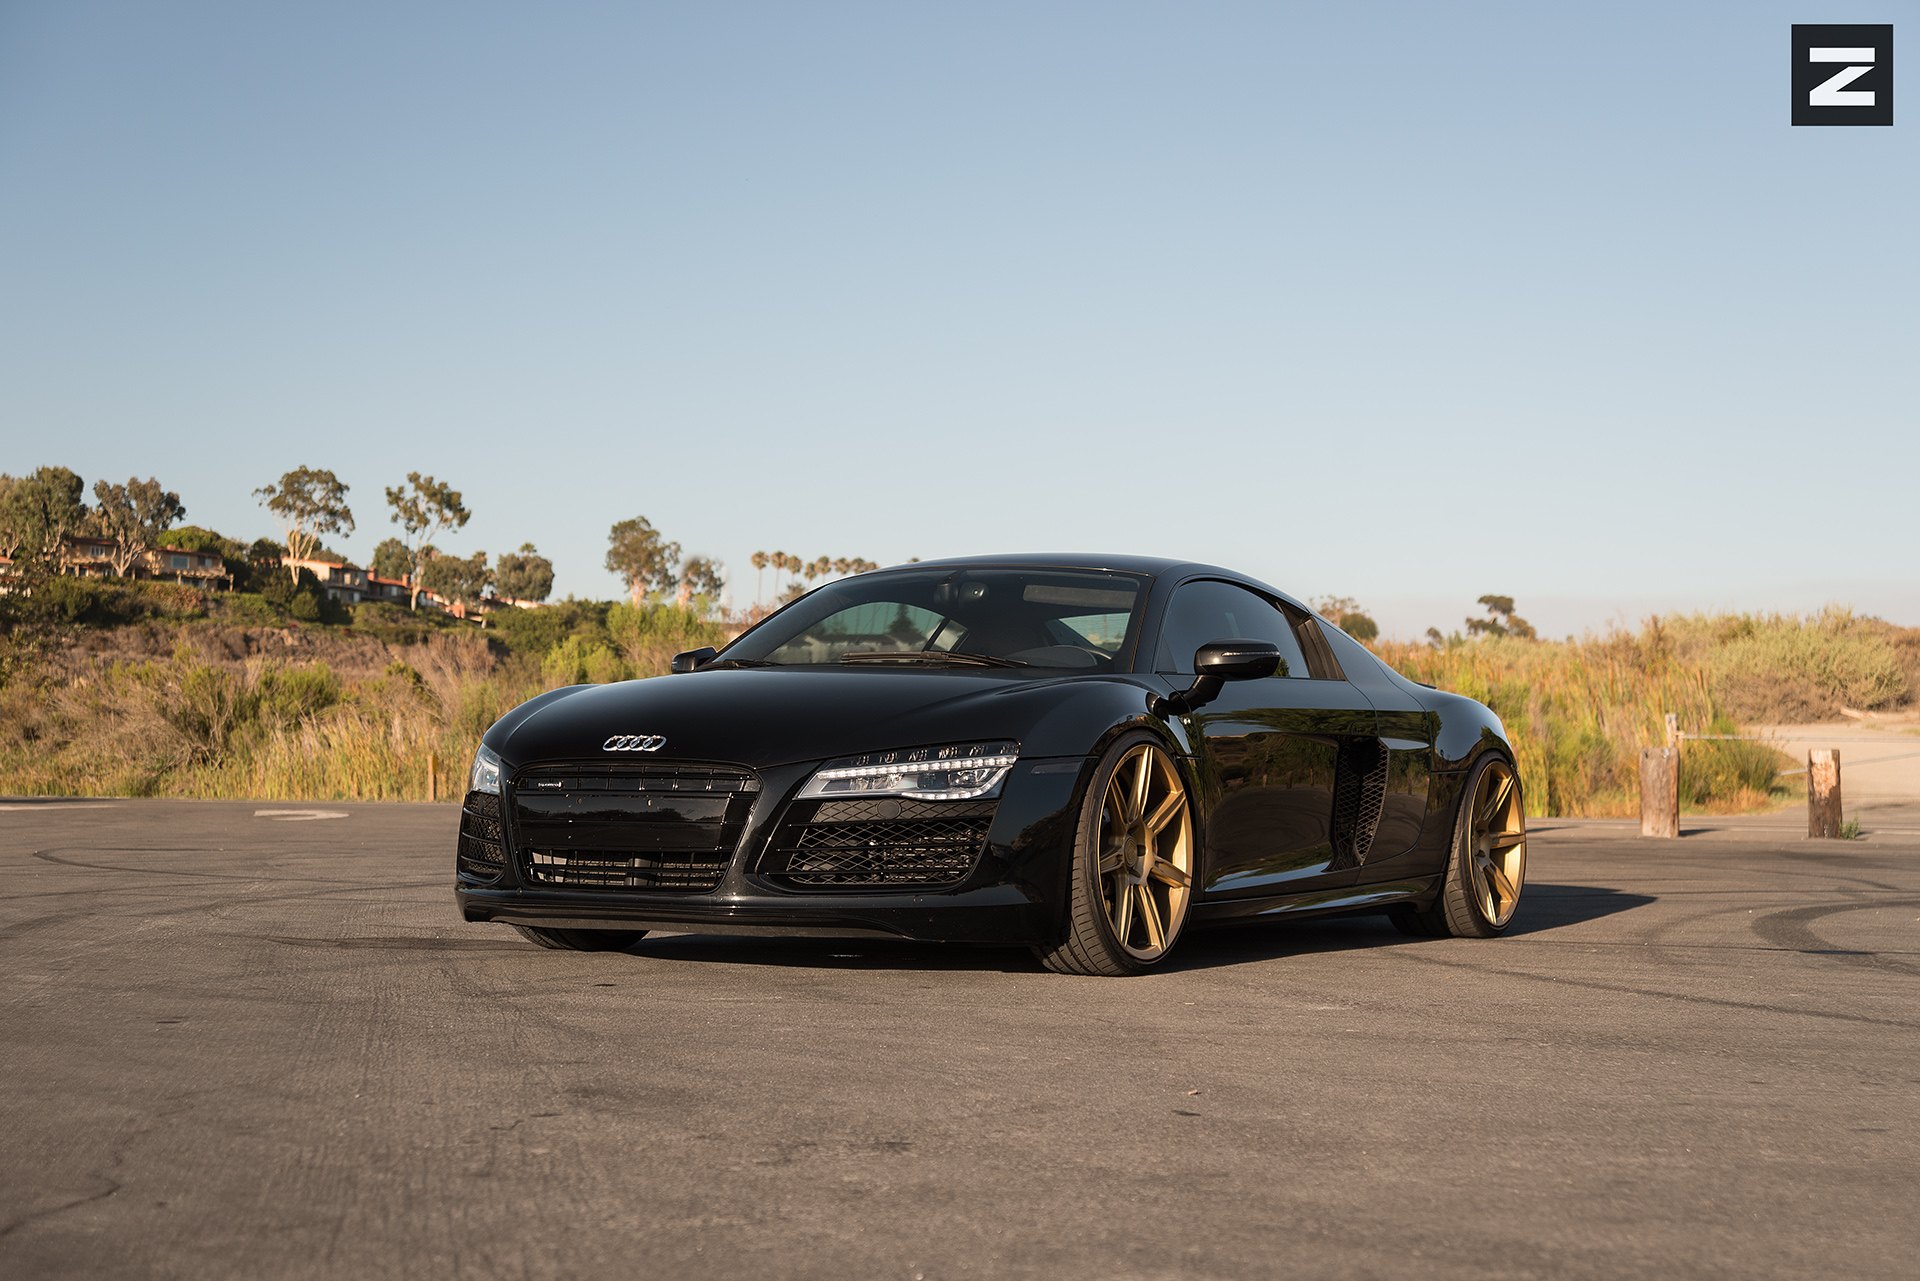 Aftermarket LED Headlights on Black Audi R8 - Photo by Zito Wheels